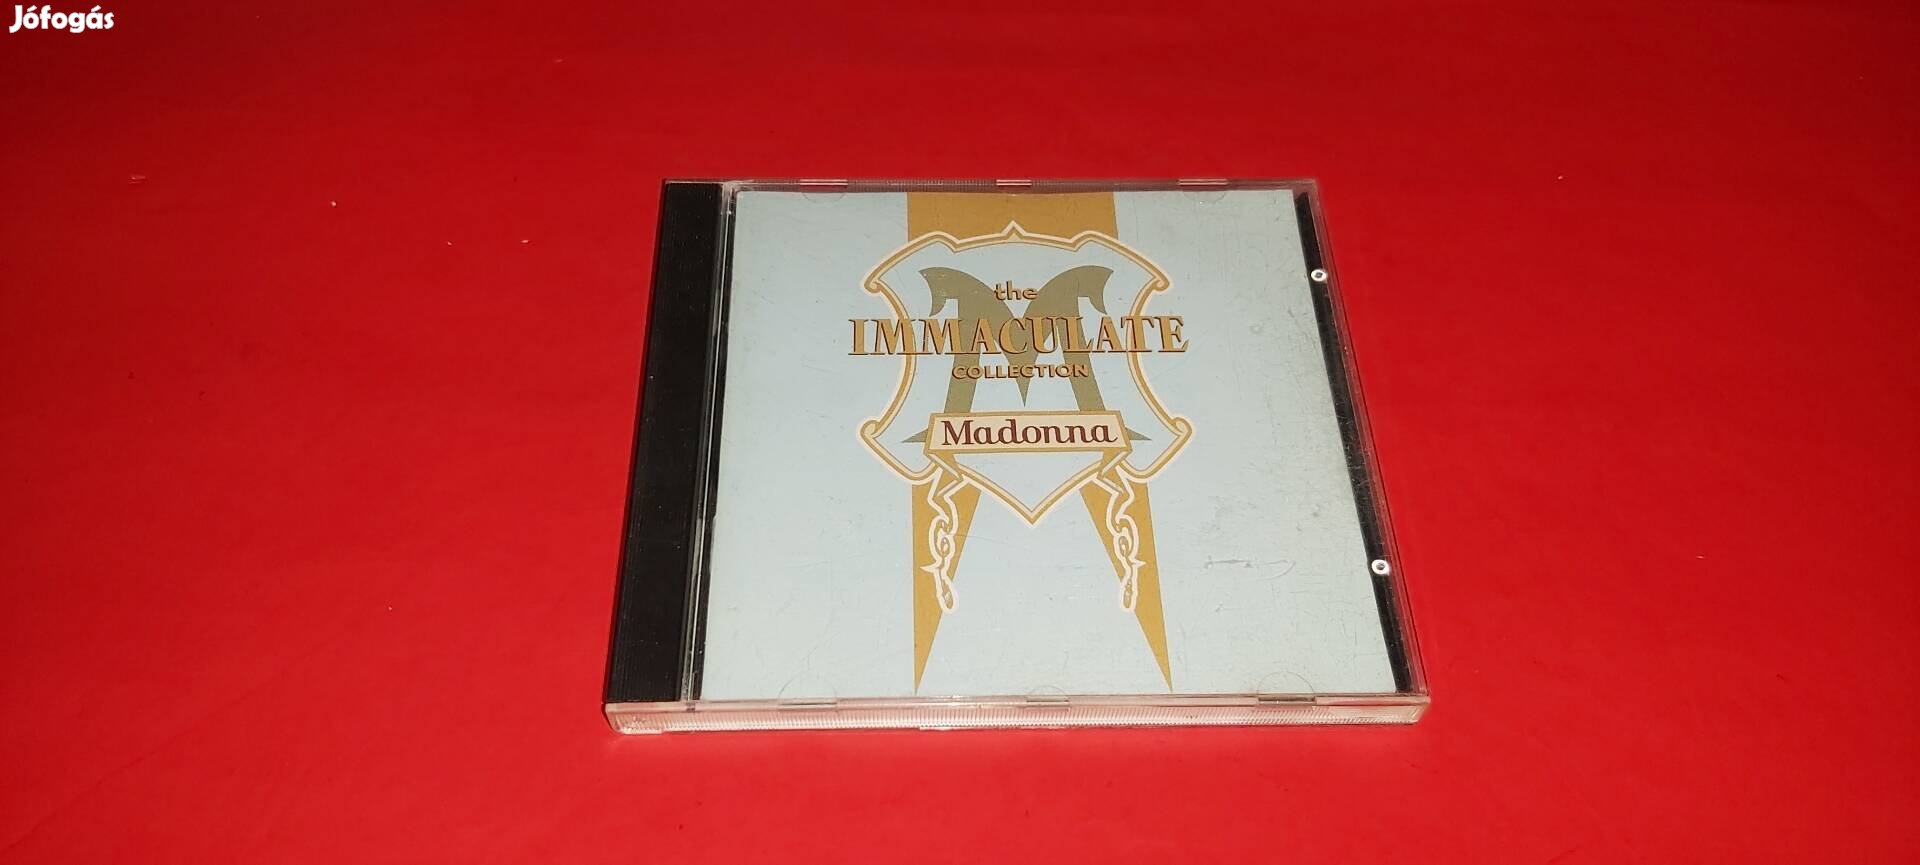 Madonna The immaculate collection Cd 1990 U.S.A.